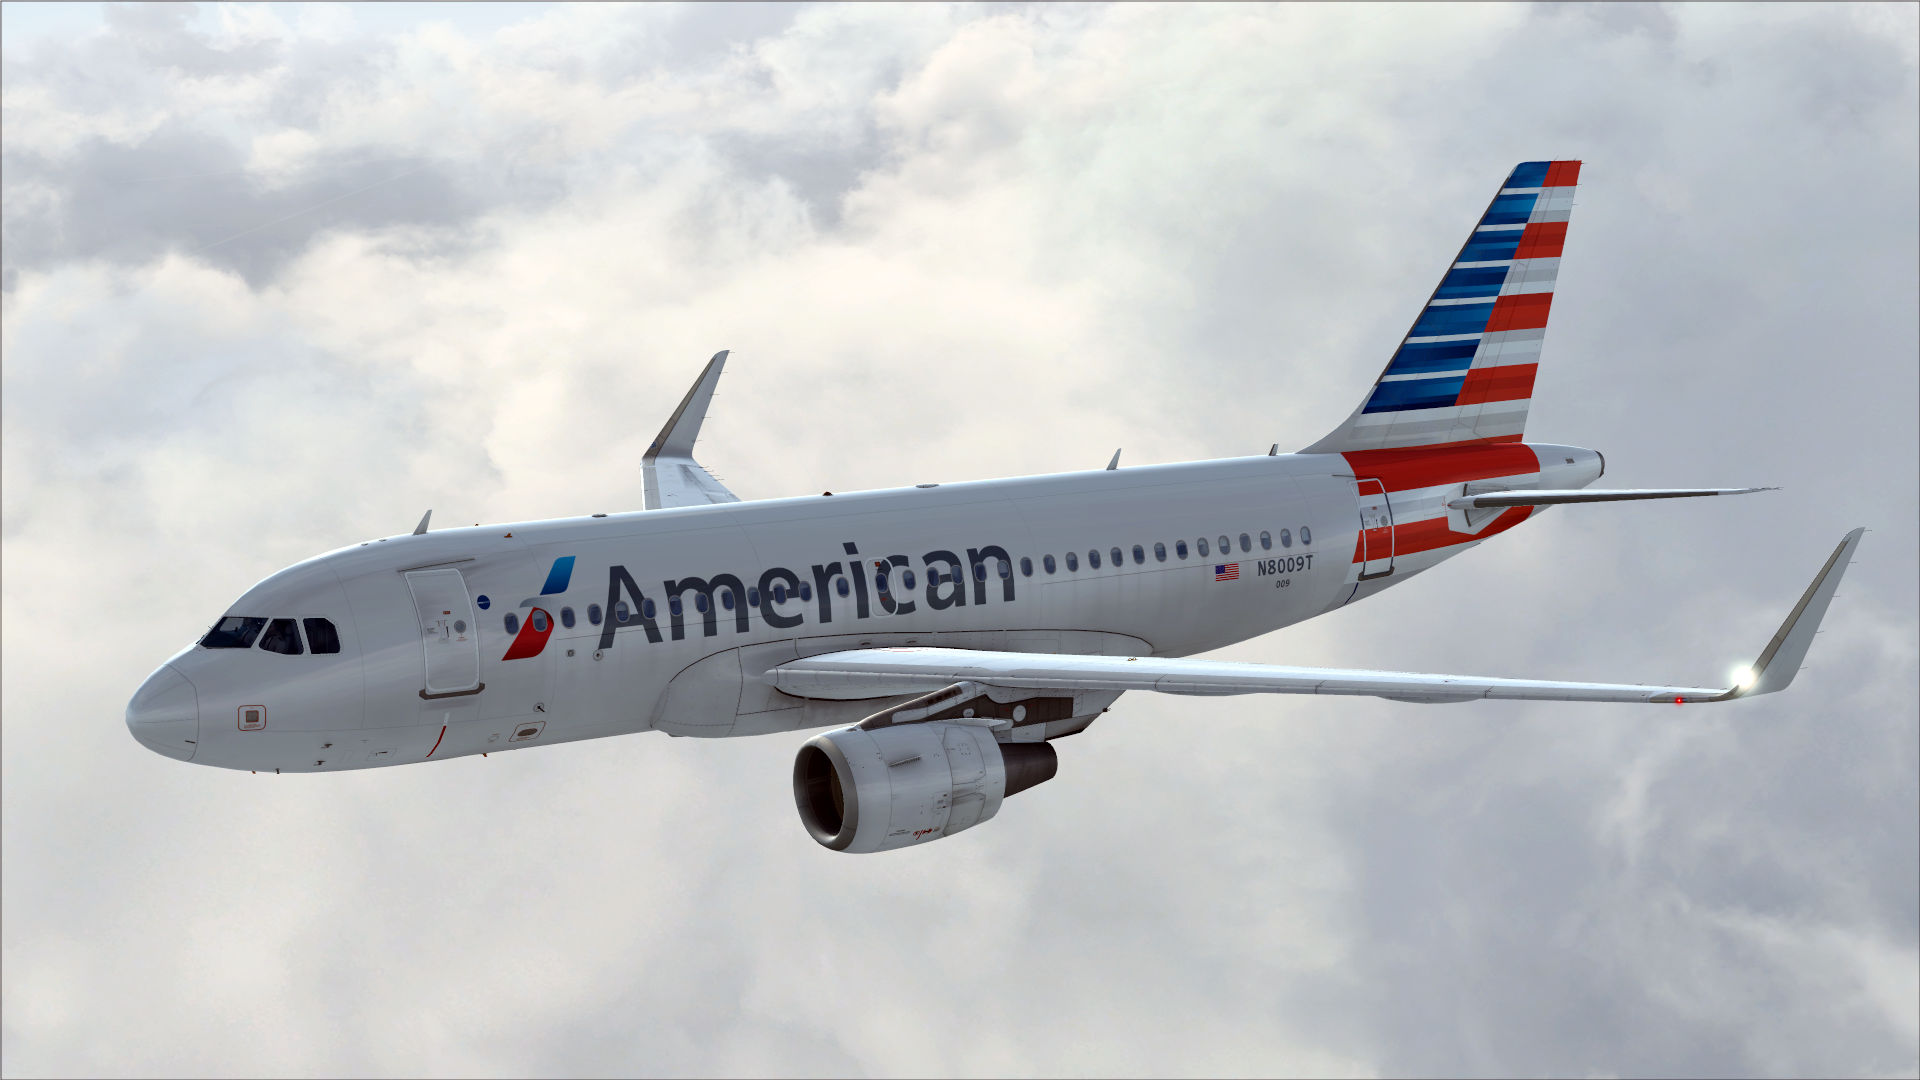 beautiful-american-airlines-high-resolution-wallpaper-for-desktop-background-download-free-desktop-wallpaper-stock-photos-desktop-images-for-apple-1920x1080